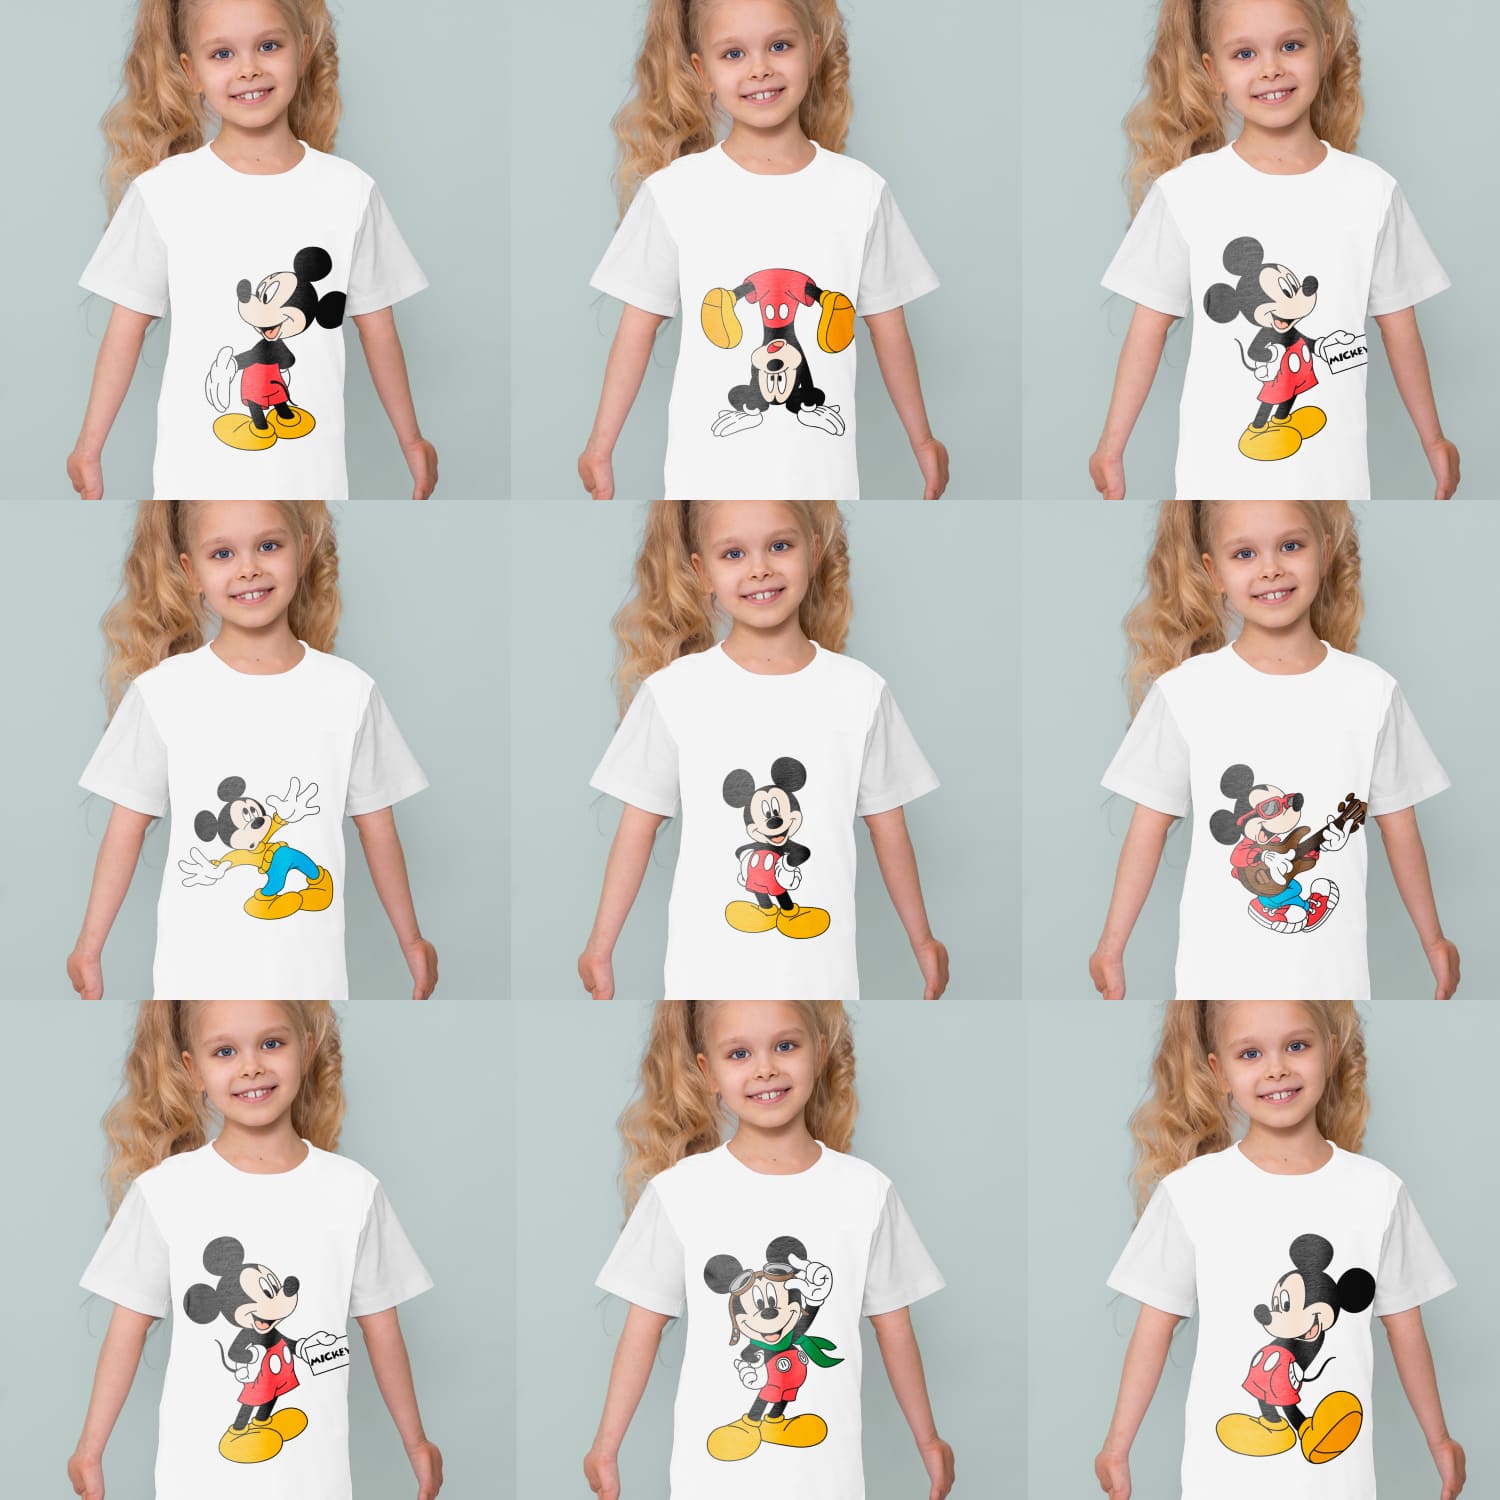 Disney mickey mouse svg created by DesignStudio.